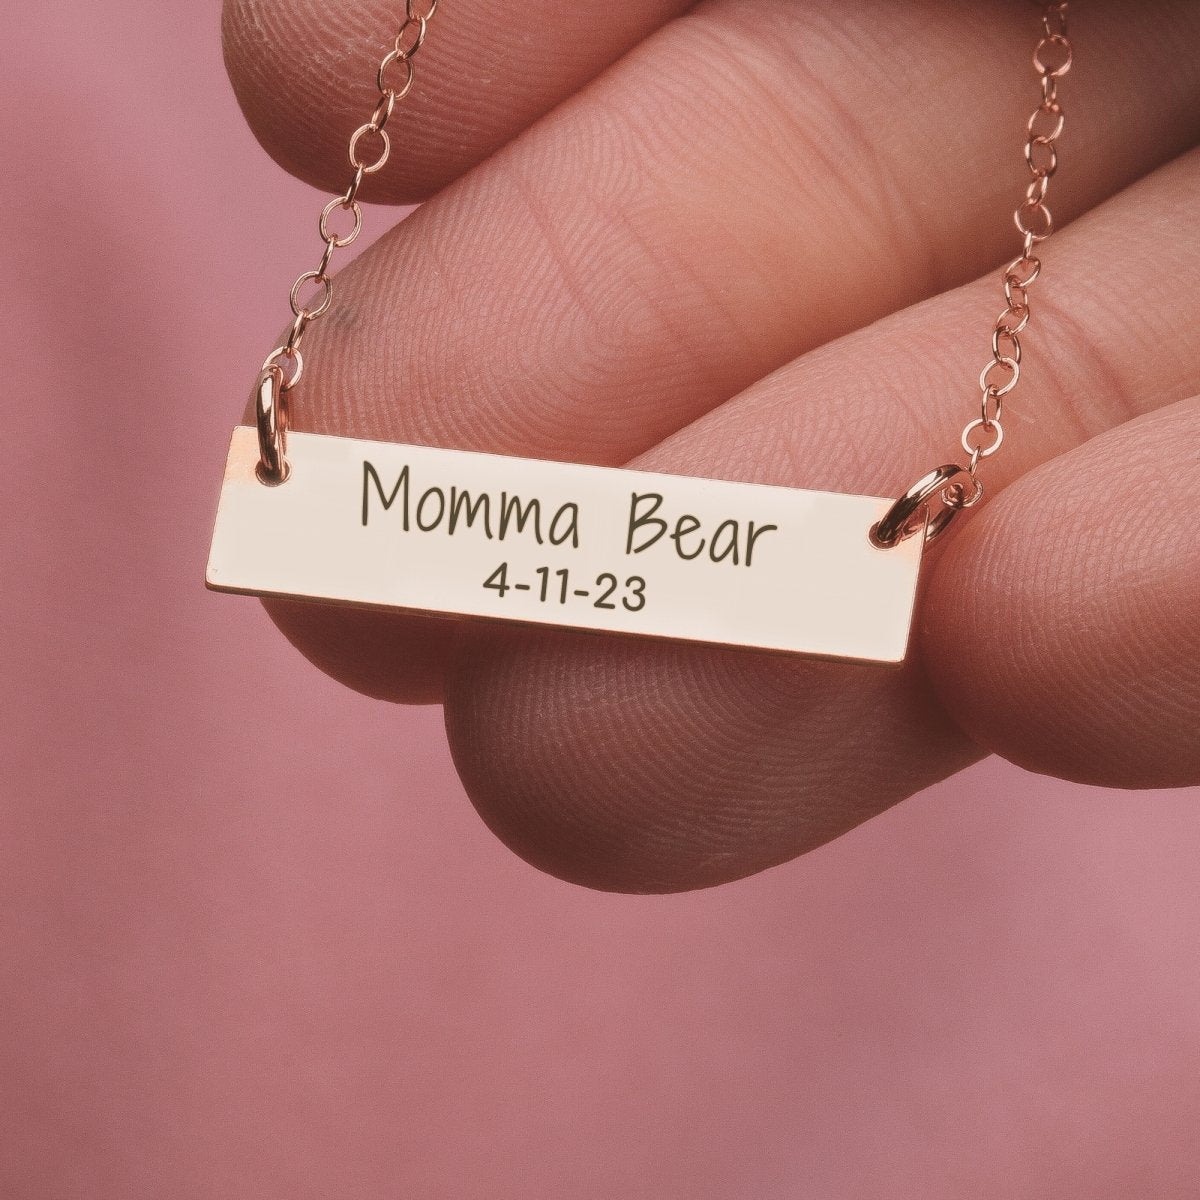 Personalized New Mom Necklace - Melanie Golden Jewelry - bar necklaces, Engraved Jewelry, Motherhood, necklace, personalized, personalized necklace